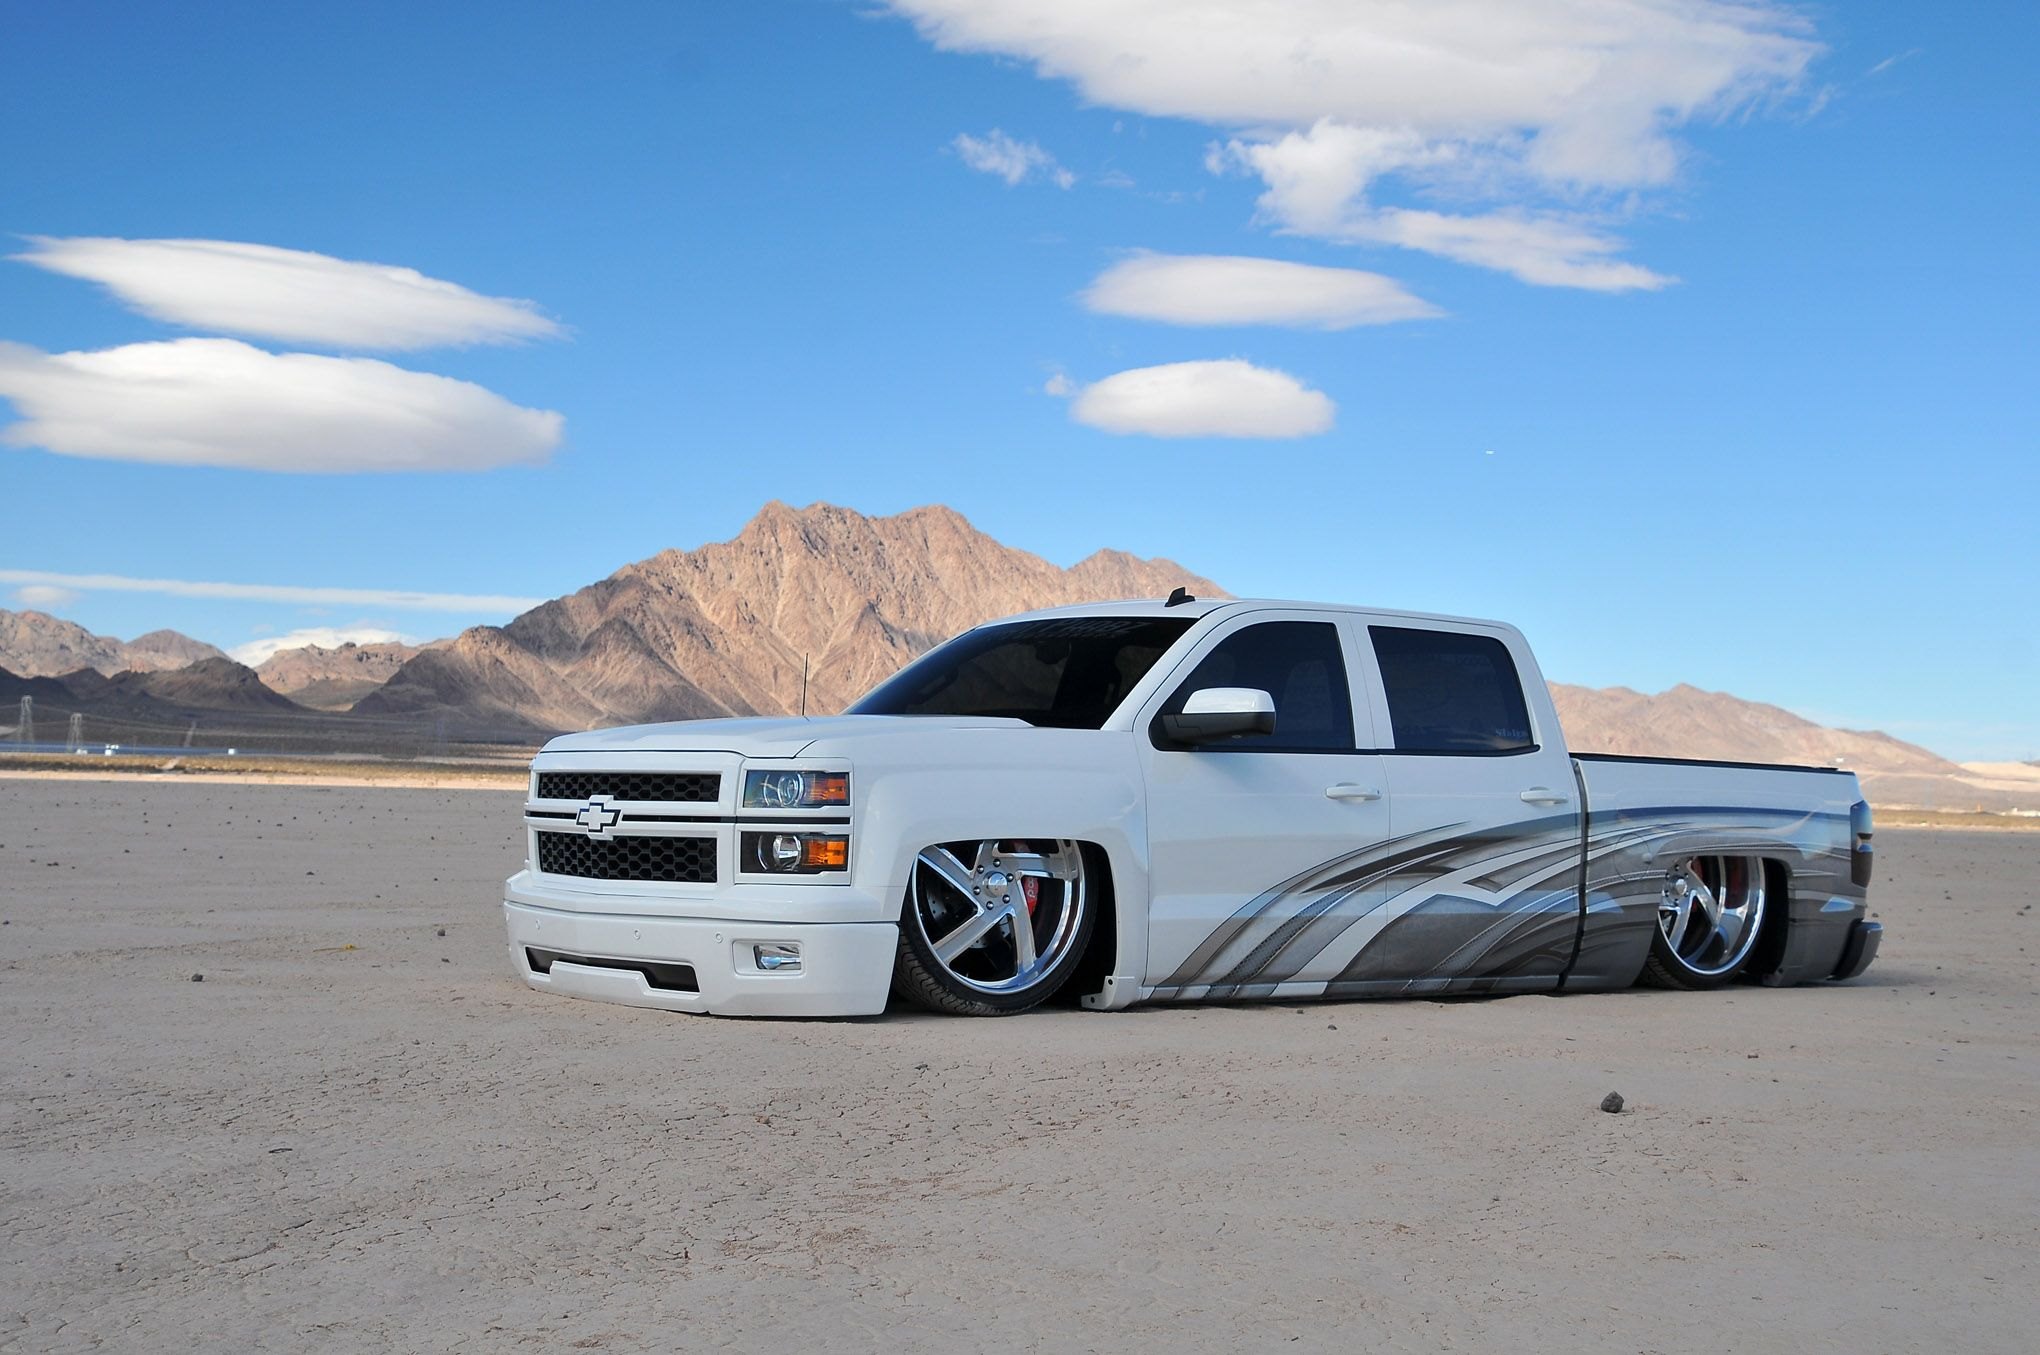 Front Bumper with Fog Lights on White Lowered Chevy Silverado - Photo by Phil Gordon